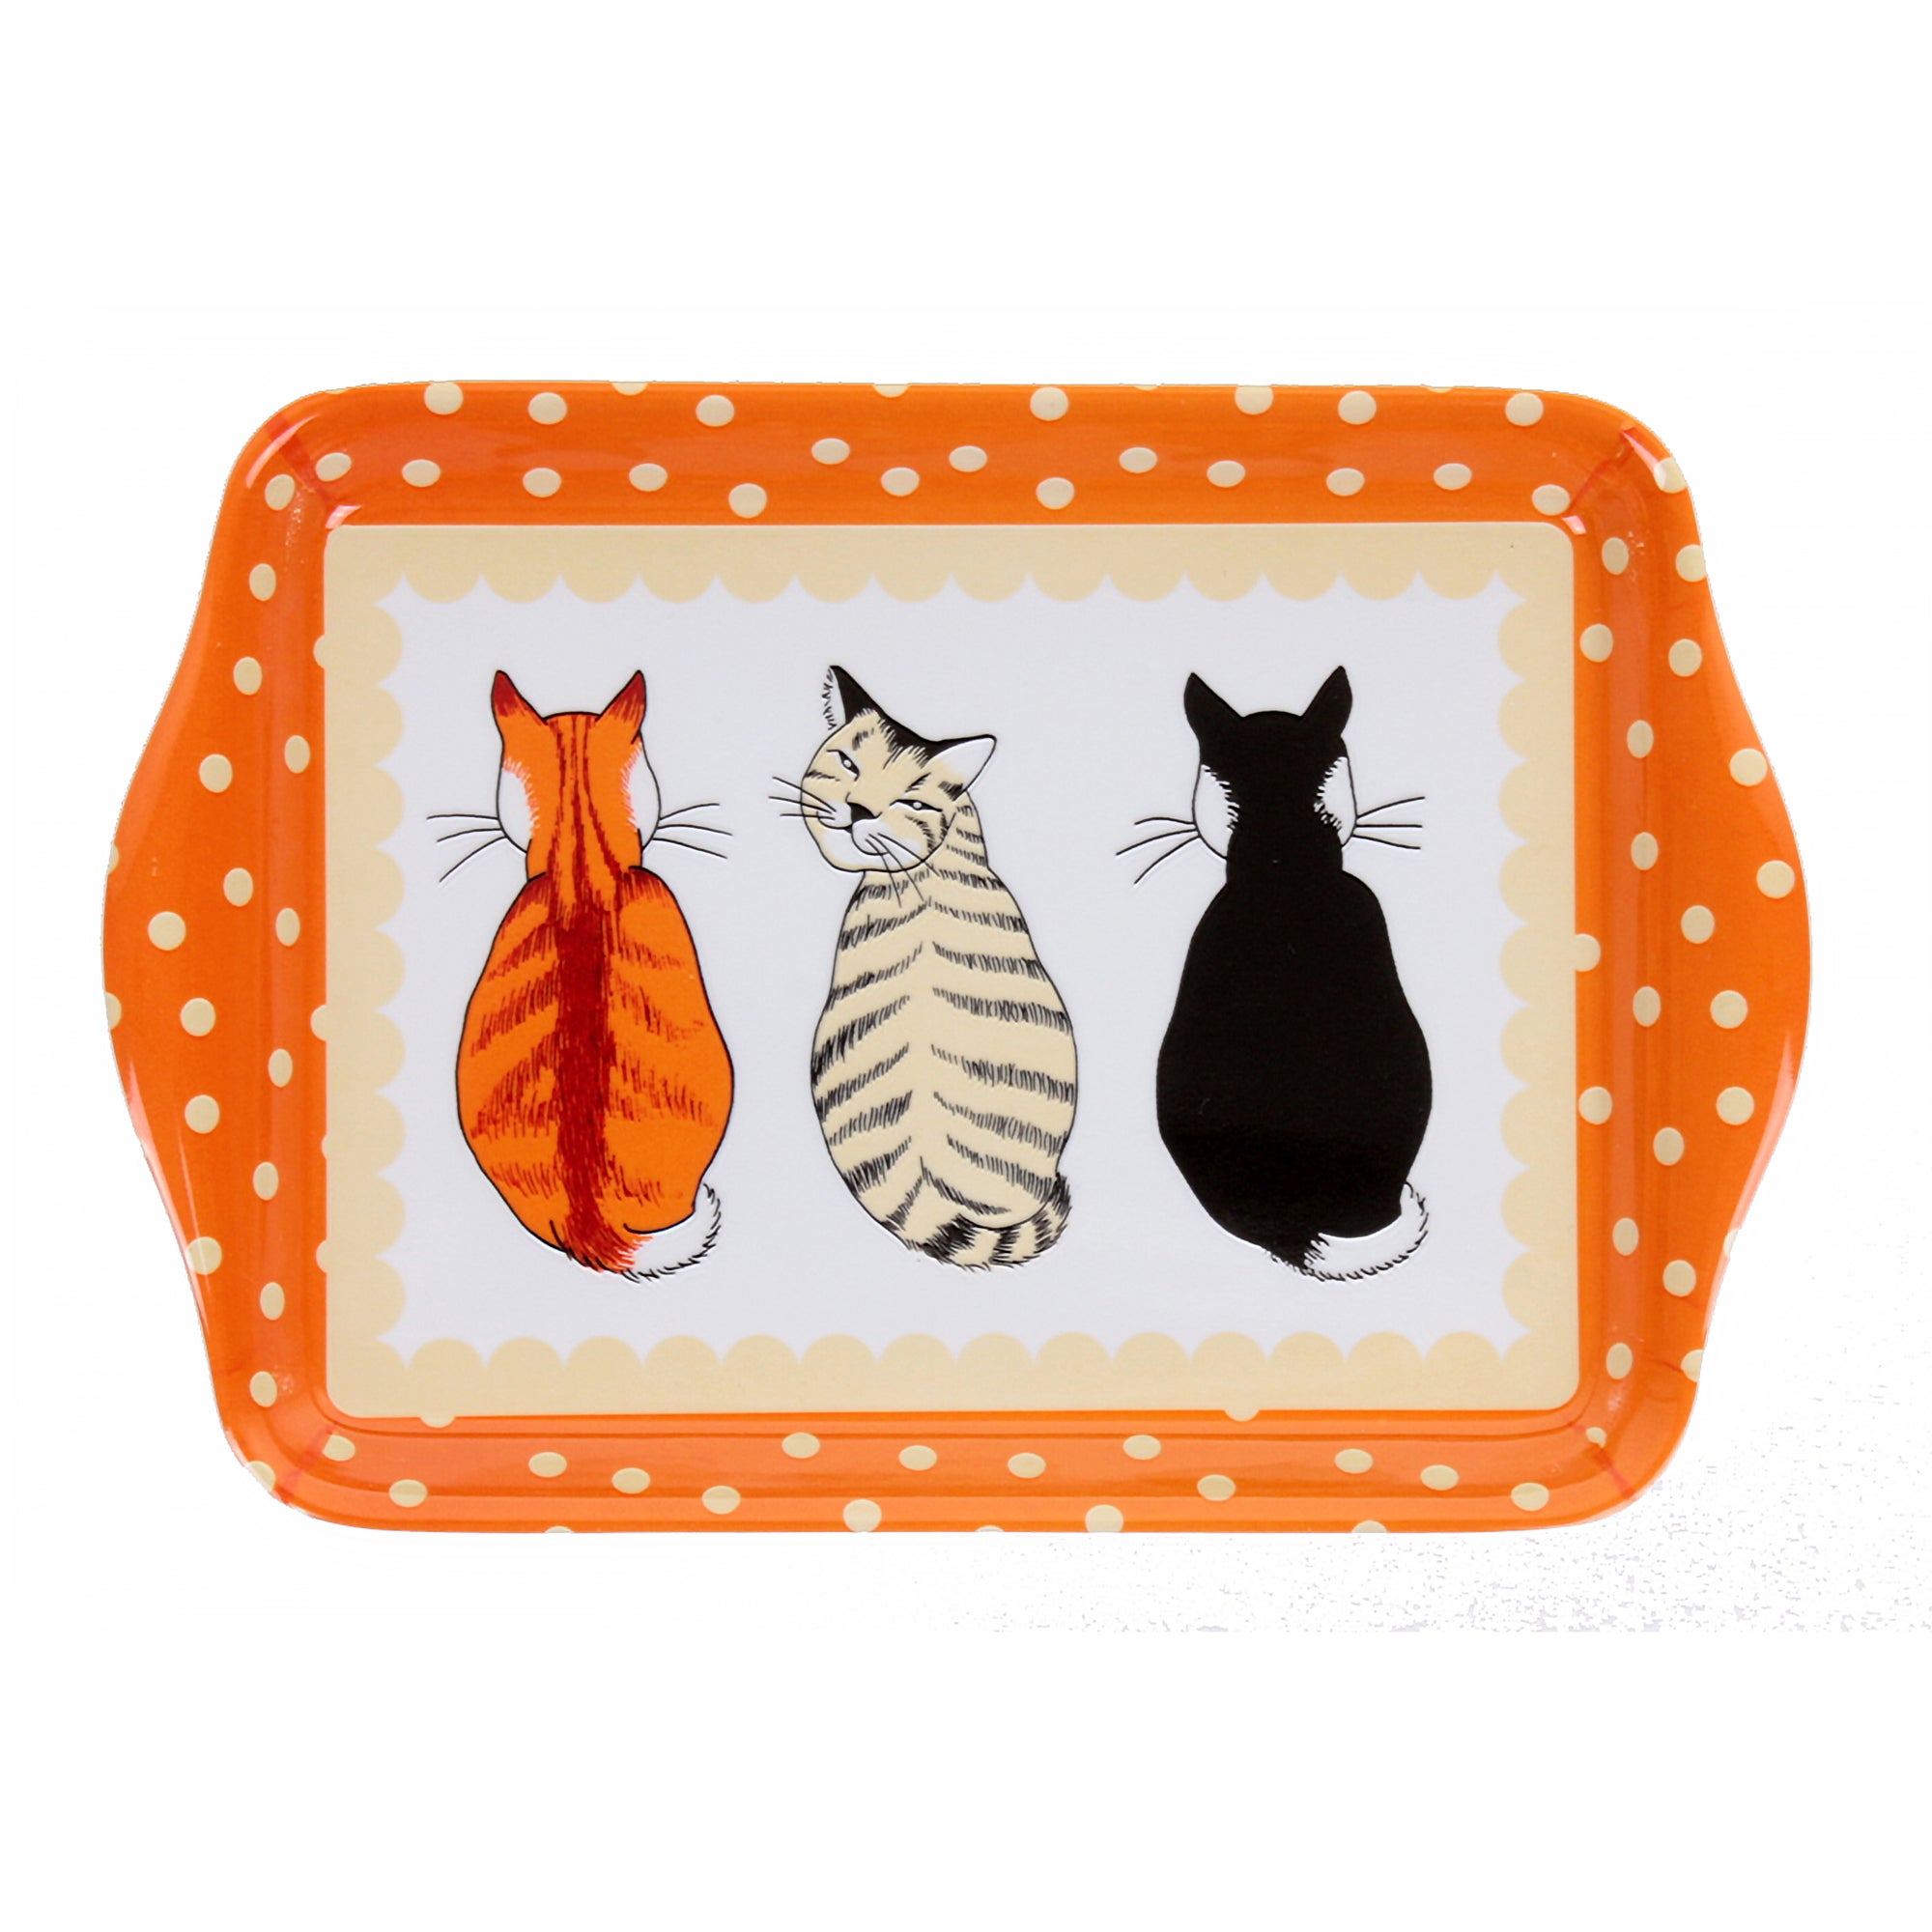 Ulster Weavers Cats in Waiting Melamine Tray